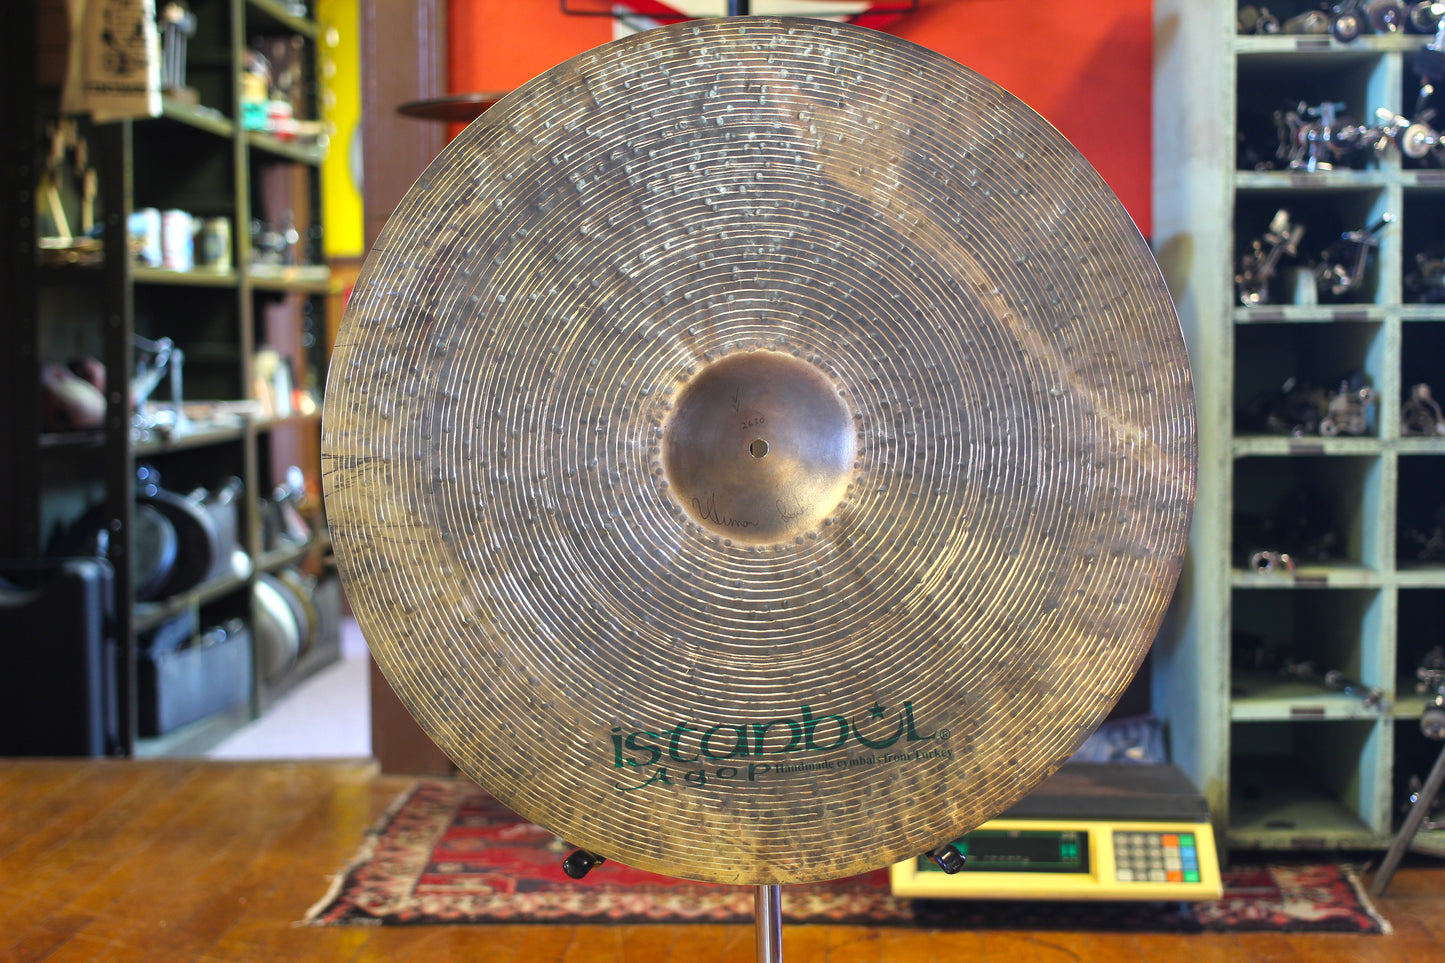 USED Istanbul Agop Signature 24" Ride Cymbal 2630g